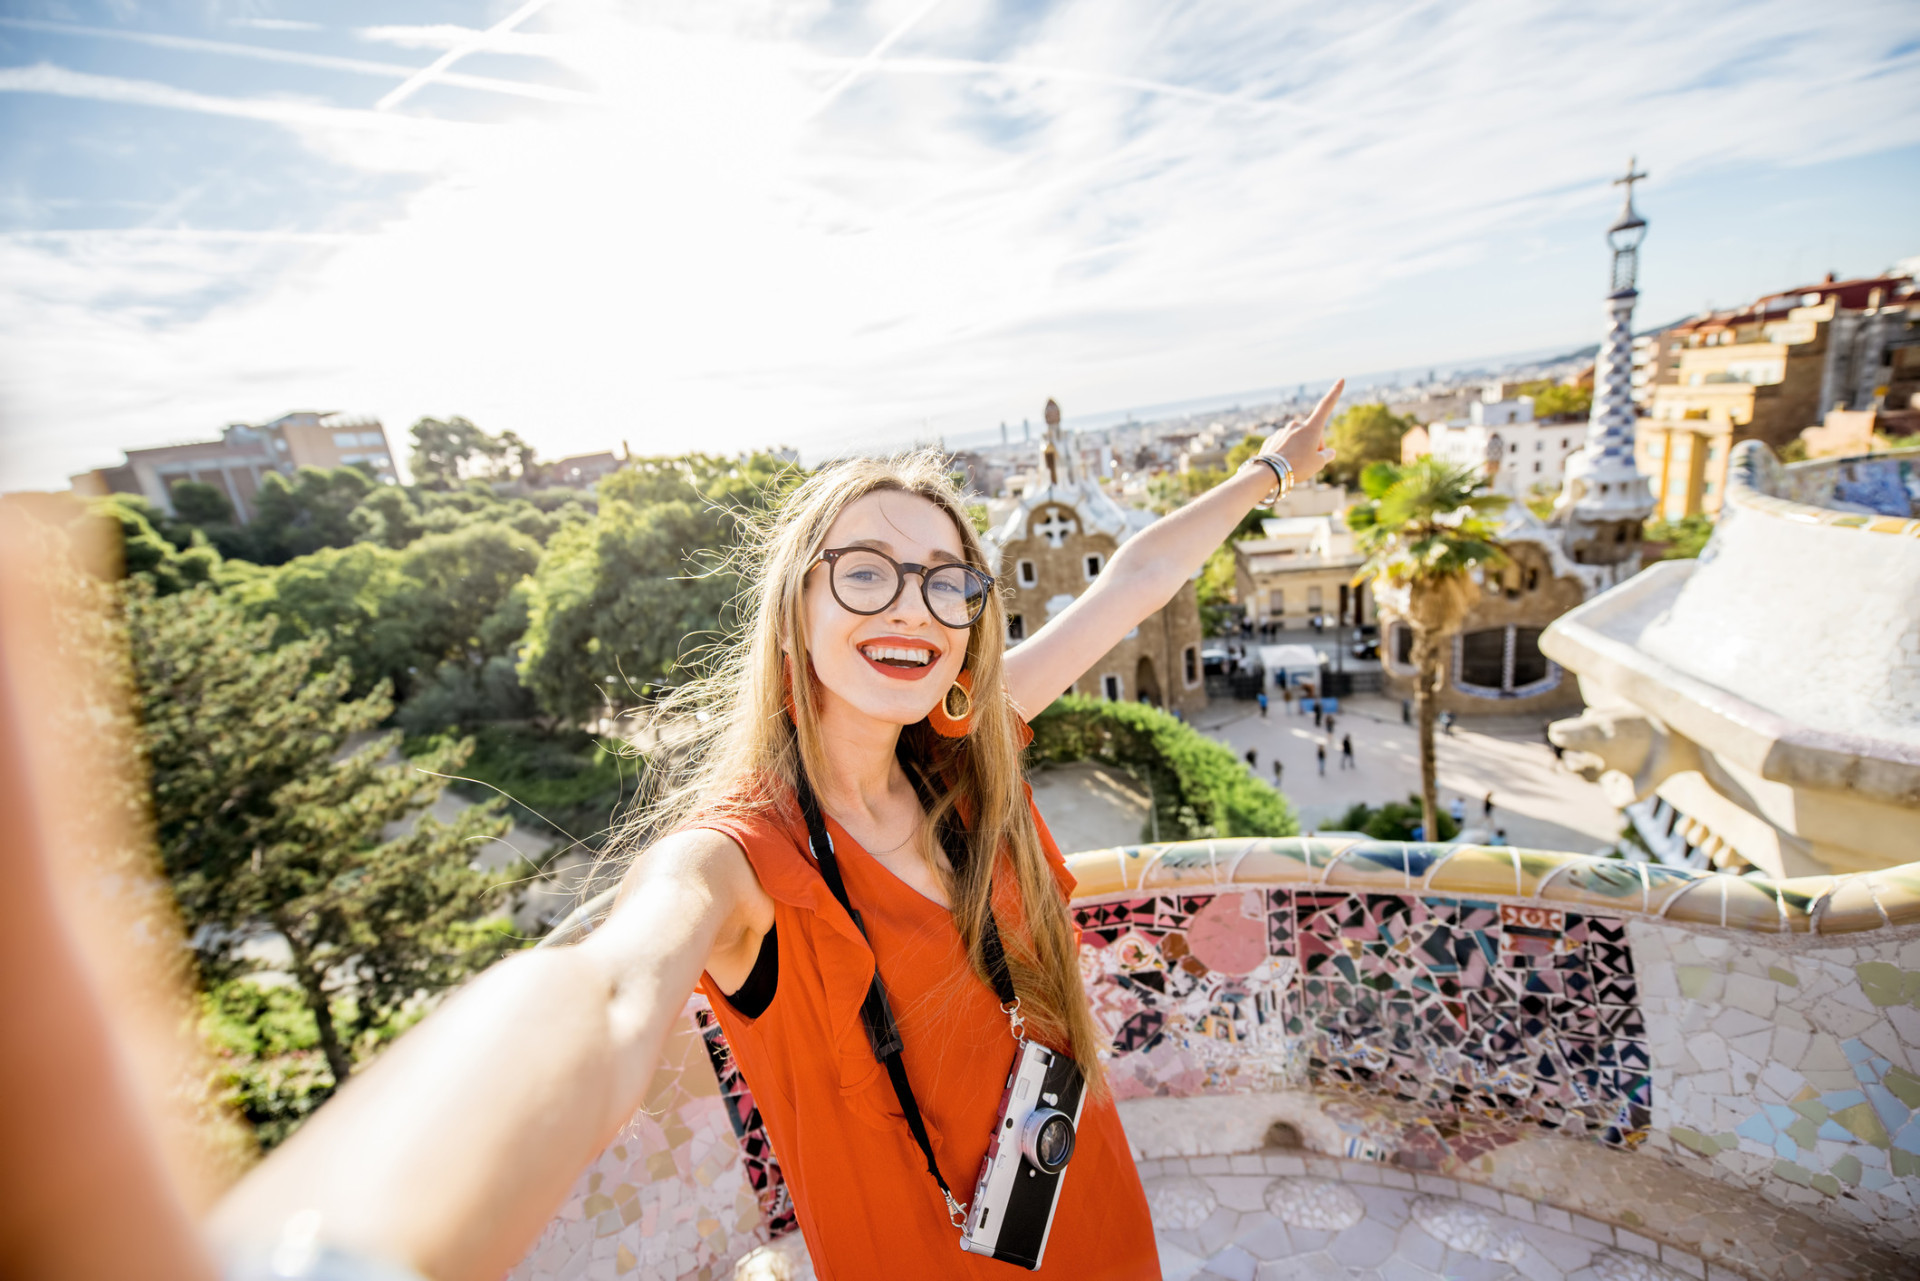 Barcelona is a large city with endless streets, landmarks, and eateries to explore. It's ideal for a solo travelers keen to explore and get lost while they're at it.